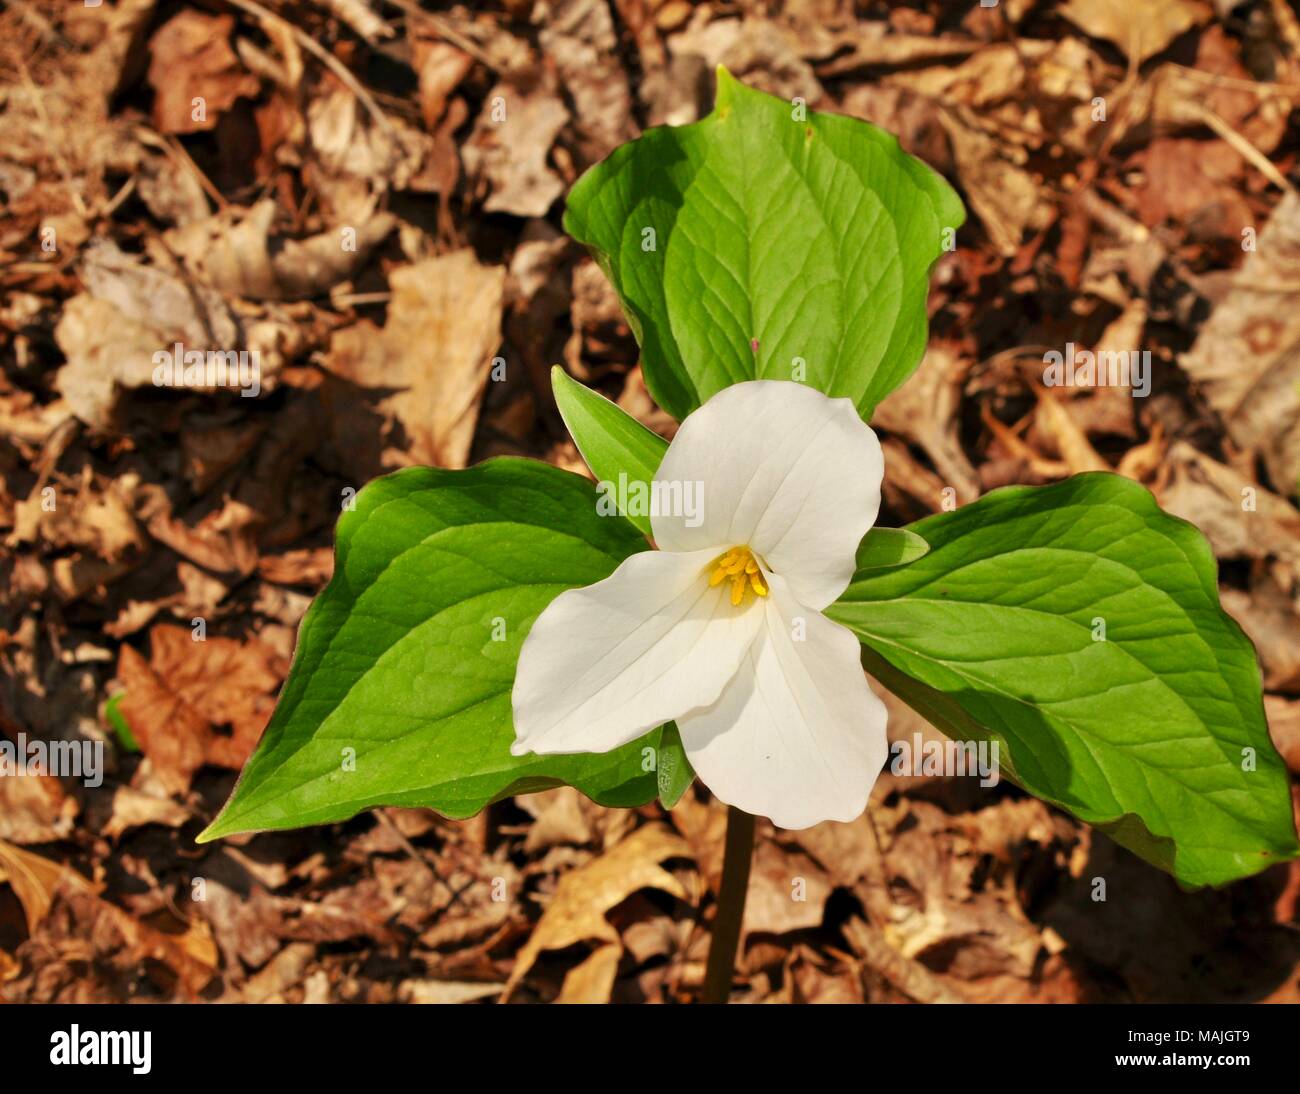 Flower and green leaves of a large white trillium plant in a spring forest. Stock Photo